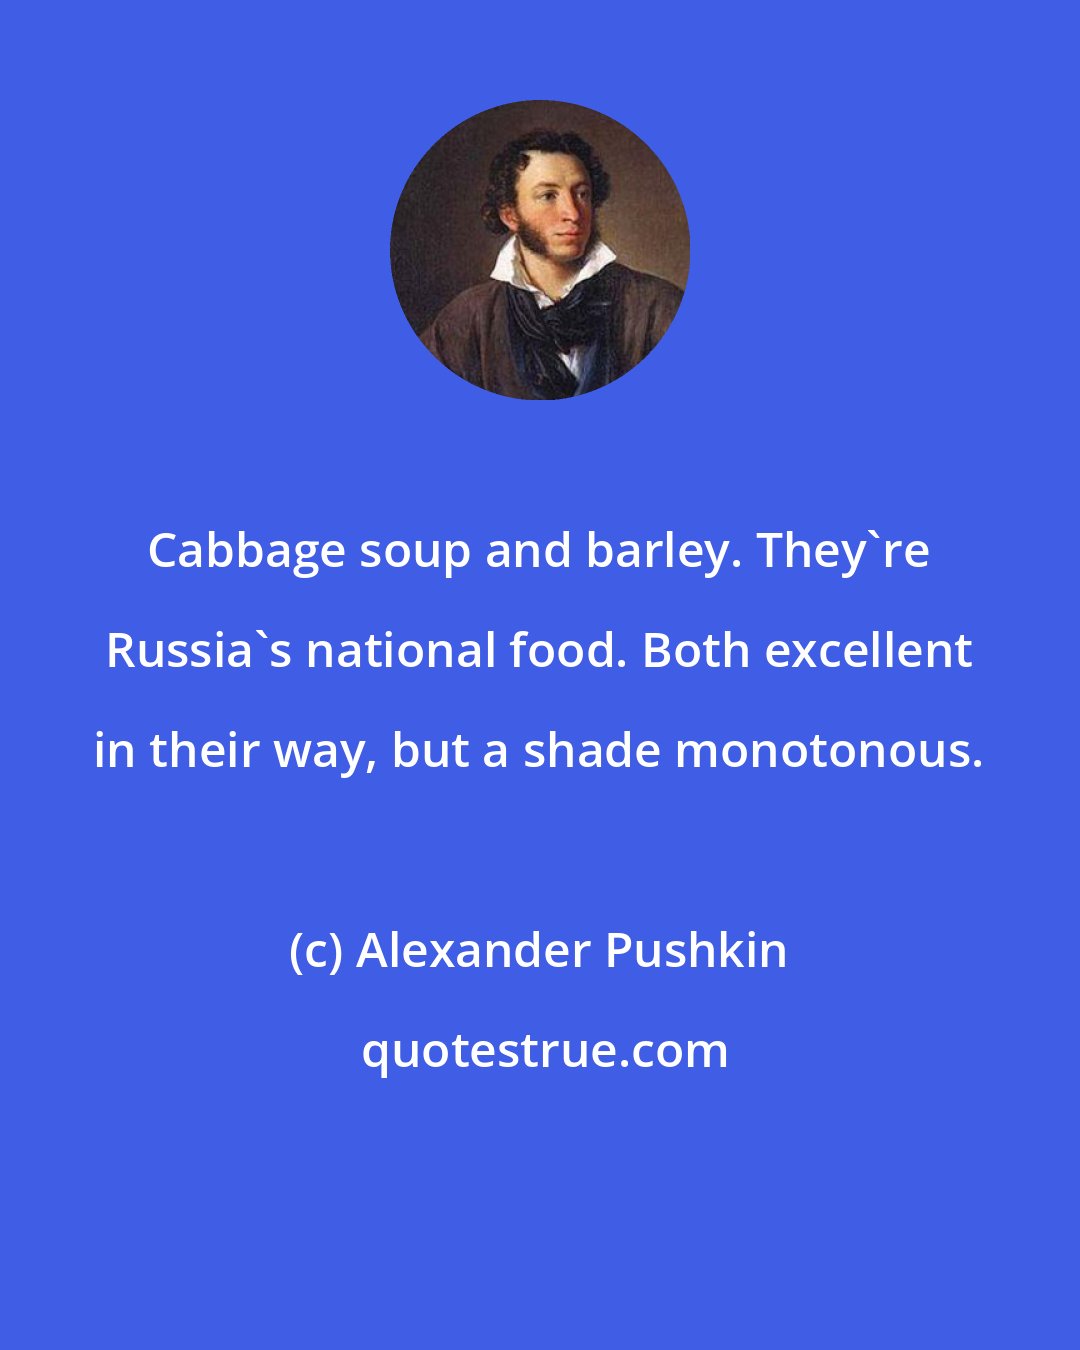 Alexander Pushkin: Cabbage soup and barley. They're Russia's national food. Both excellent in their way, but a shade monotonous.